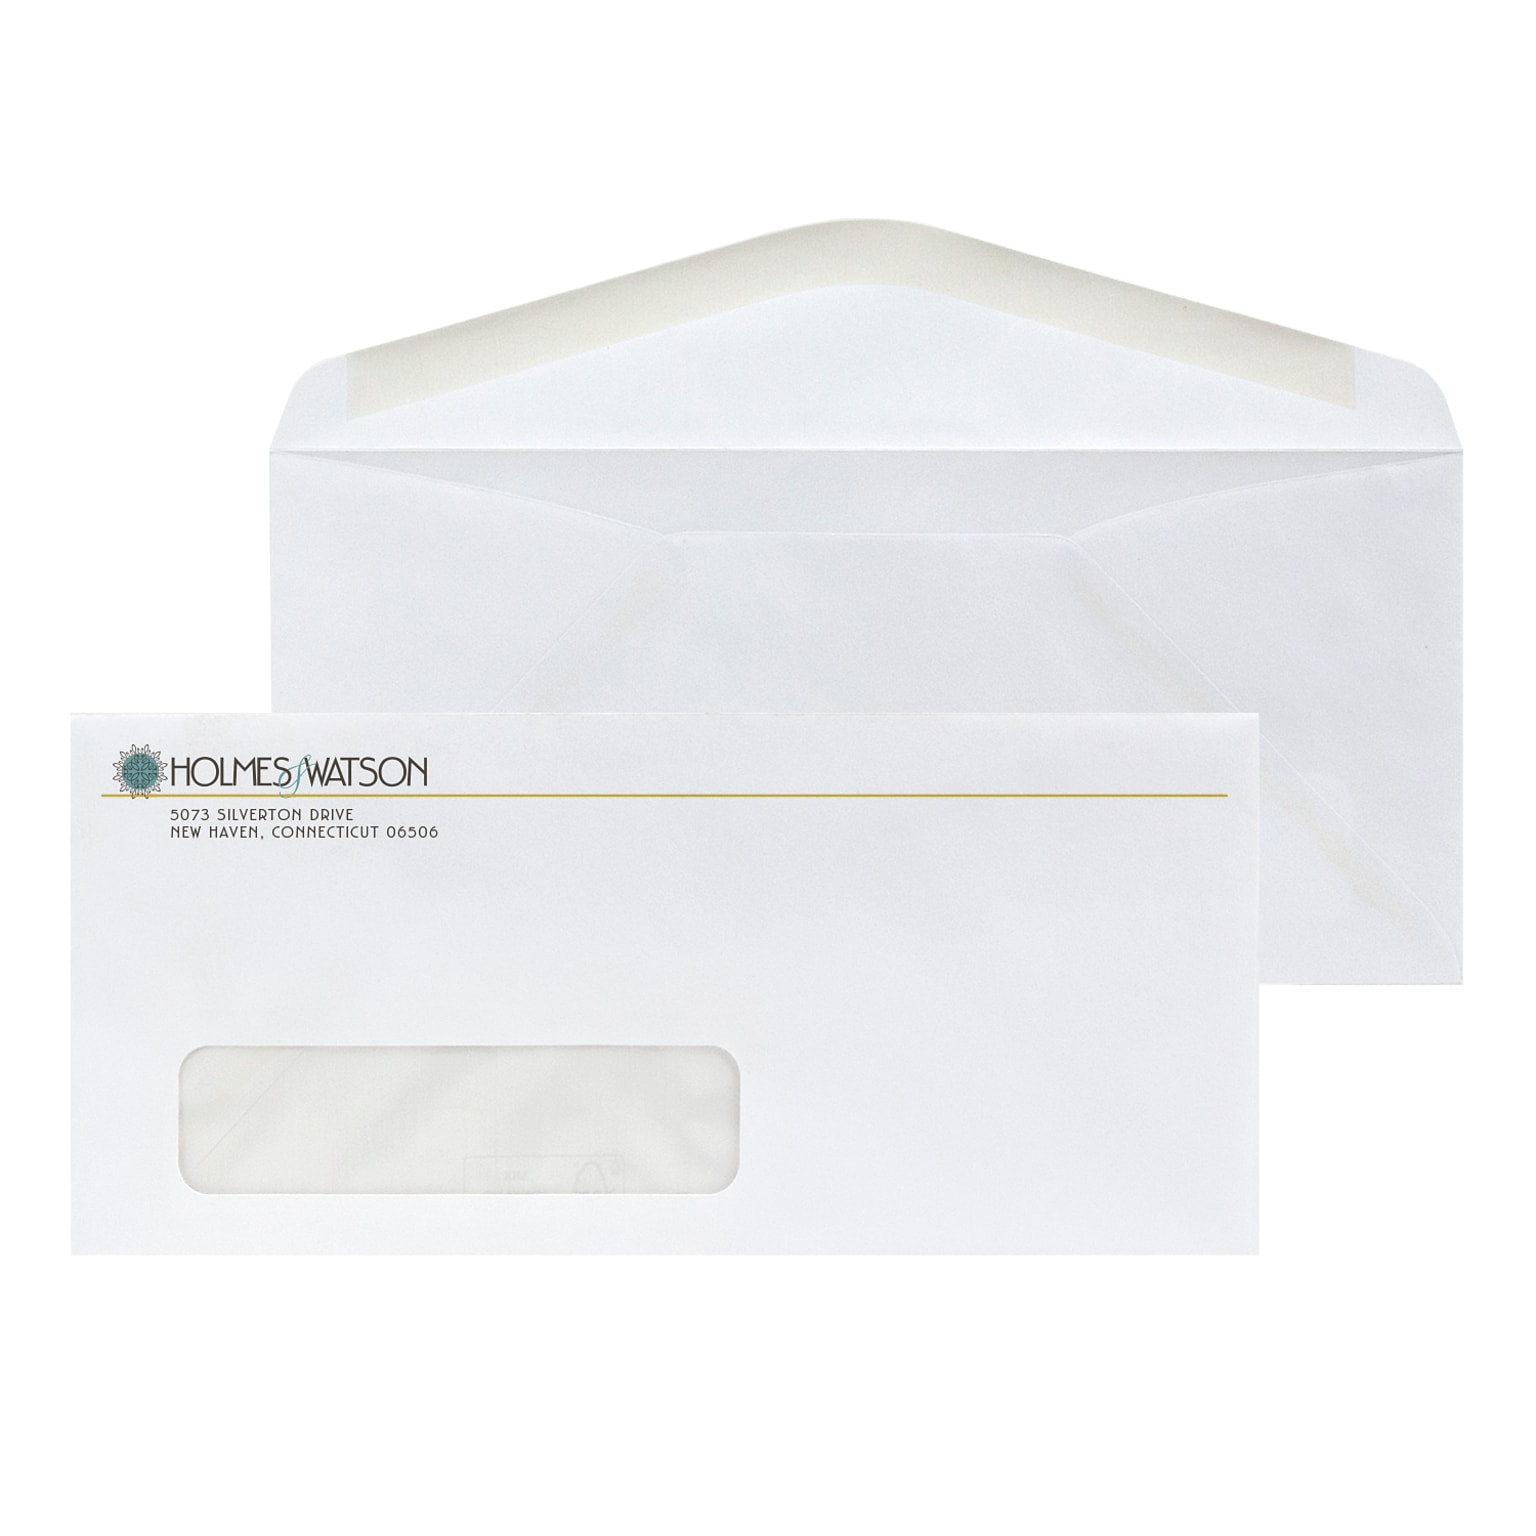 Custom Full Color #10 Window Envelopes, 4 1/4 x 9 1/2, Recycled 24# White Wove with EarthFirst/SFI Logo, 250 / Pack